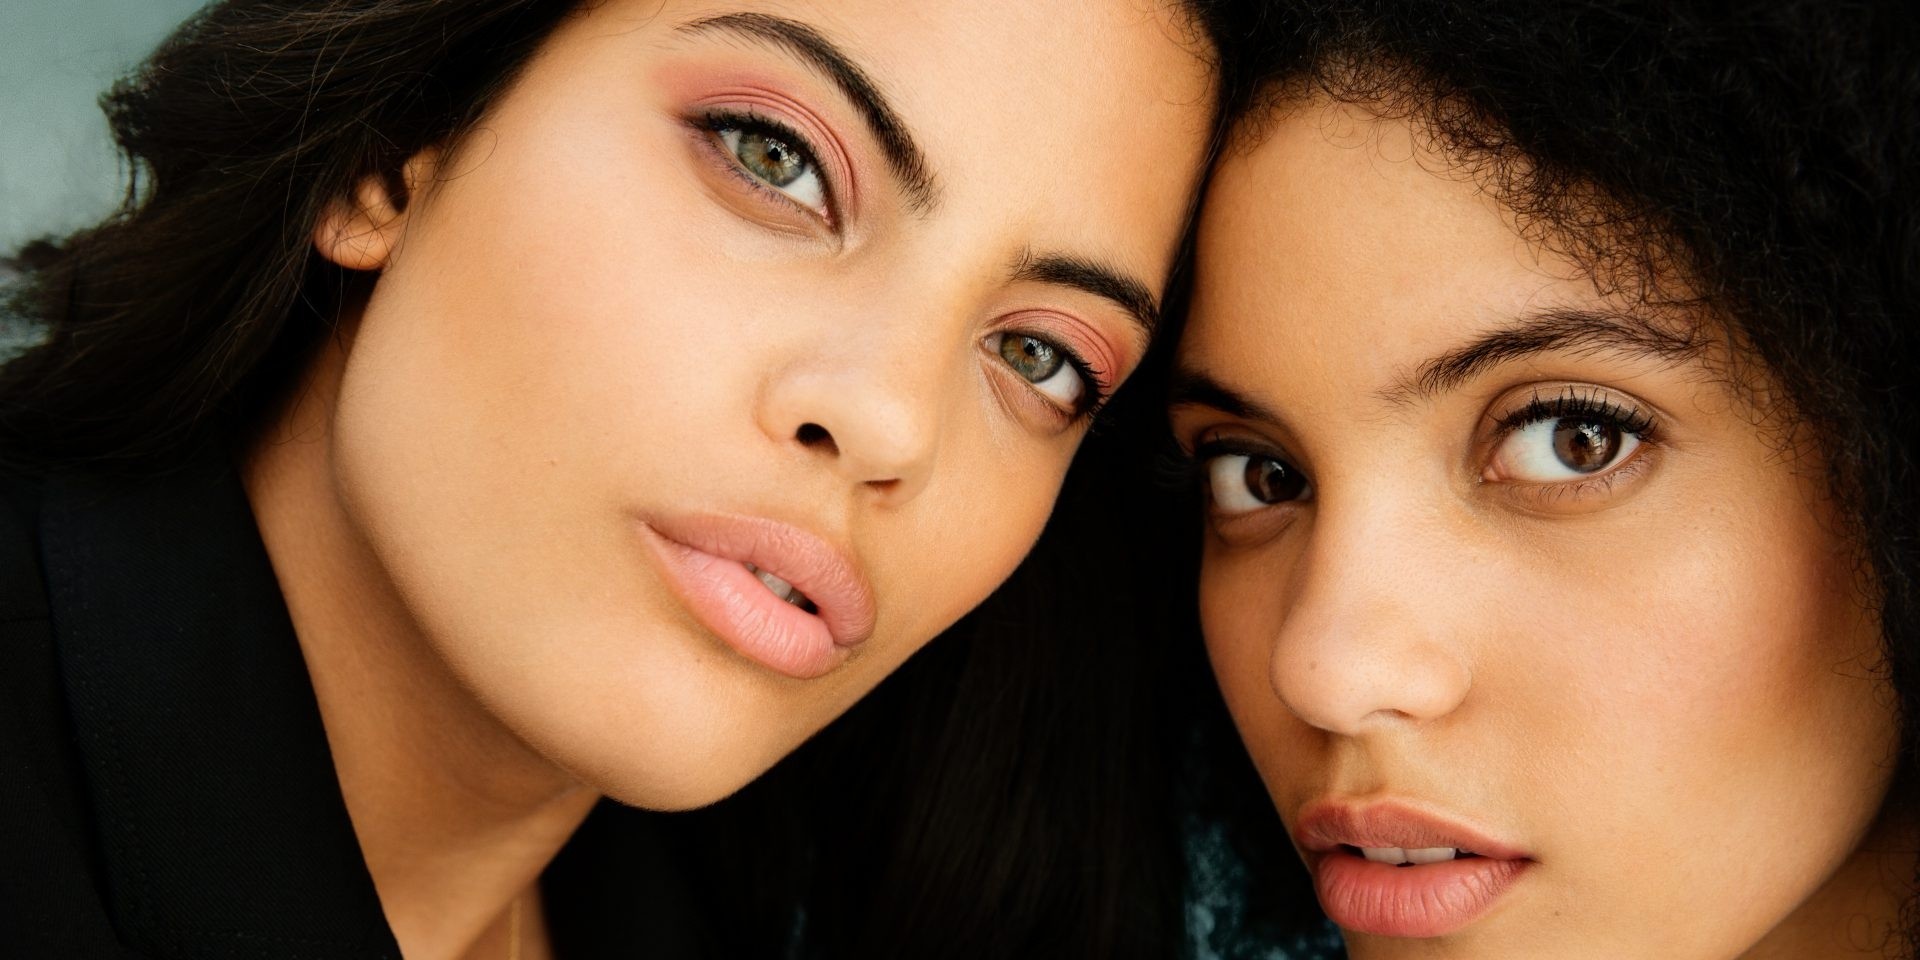 "You don't know how much power a song has": An interview with Ibeyi